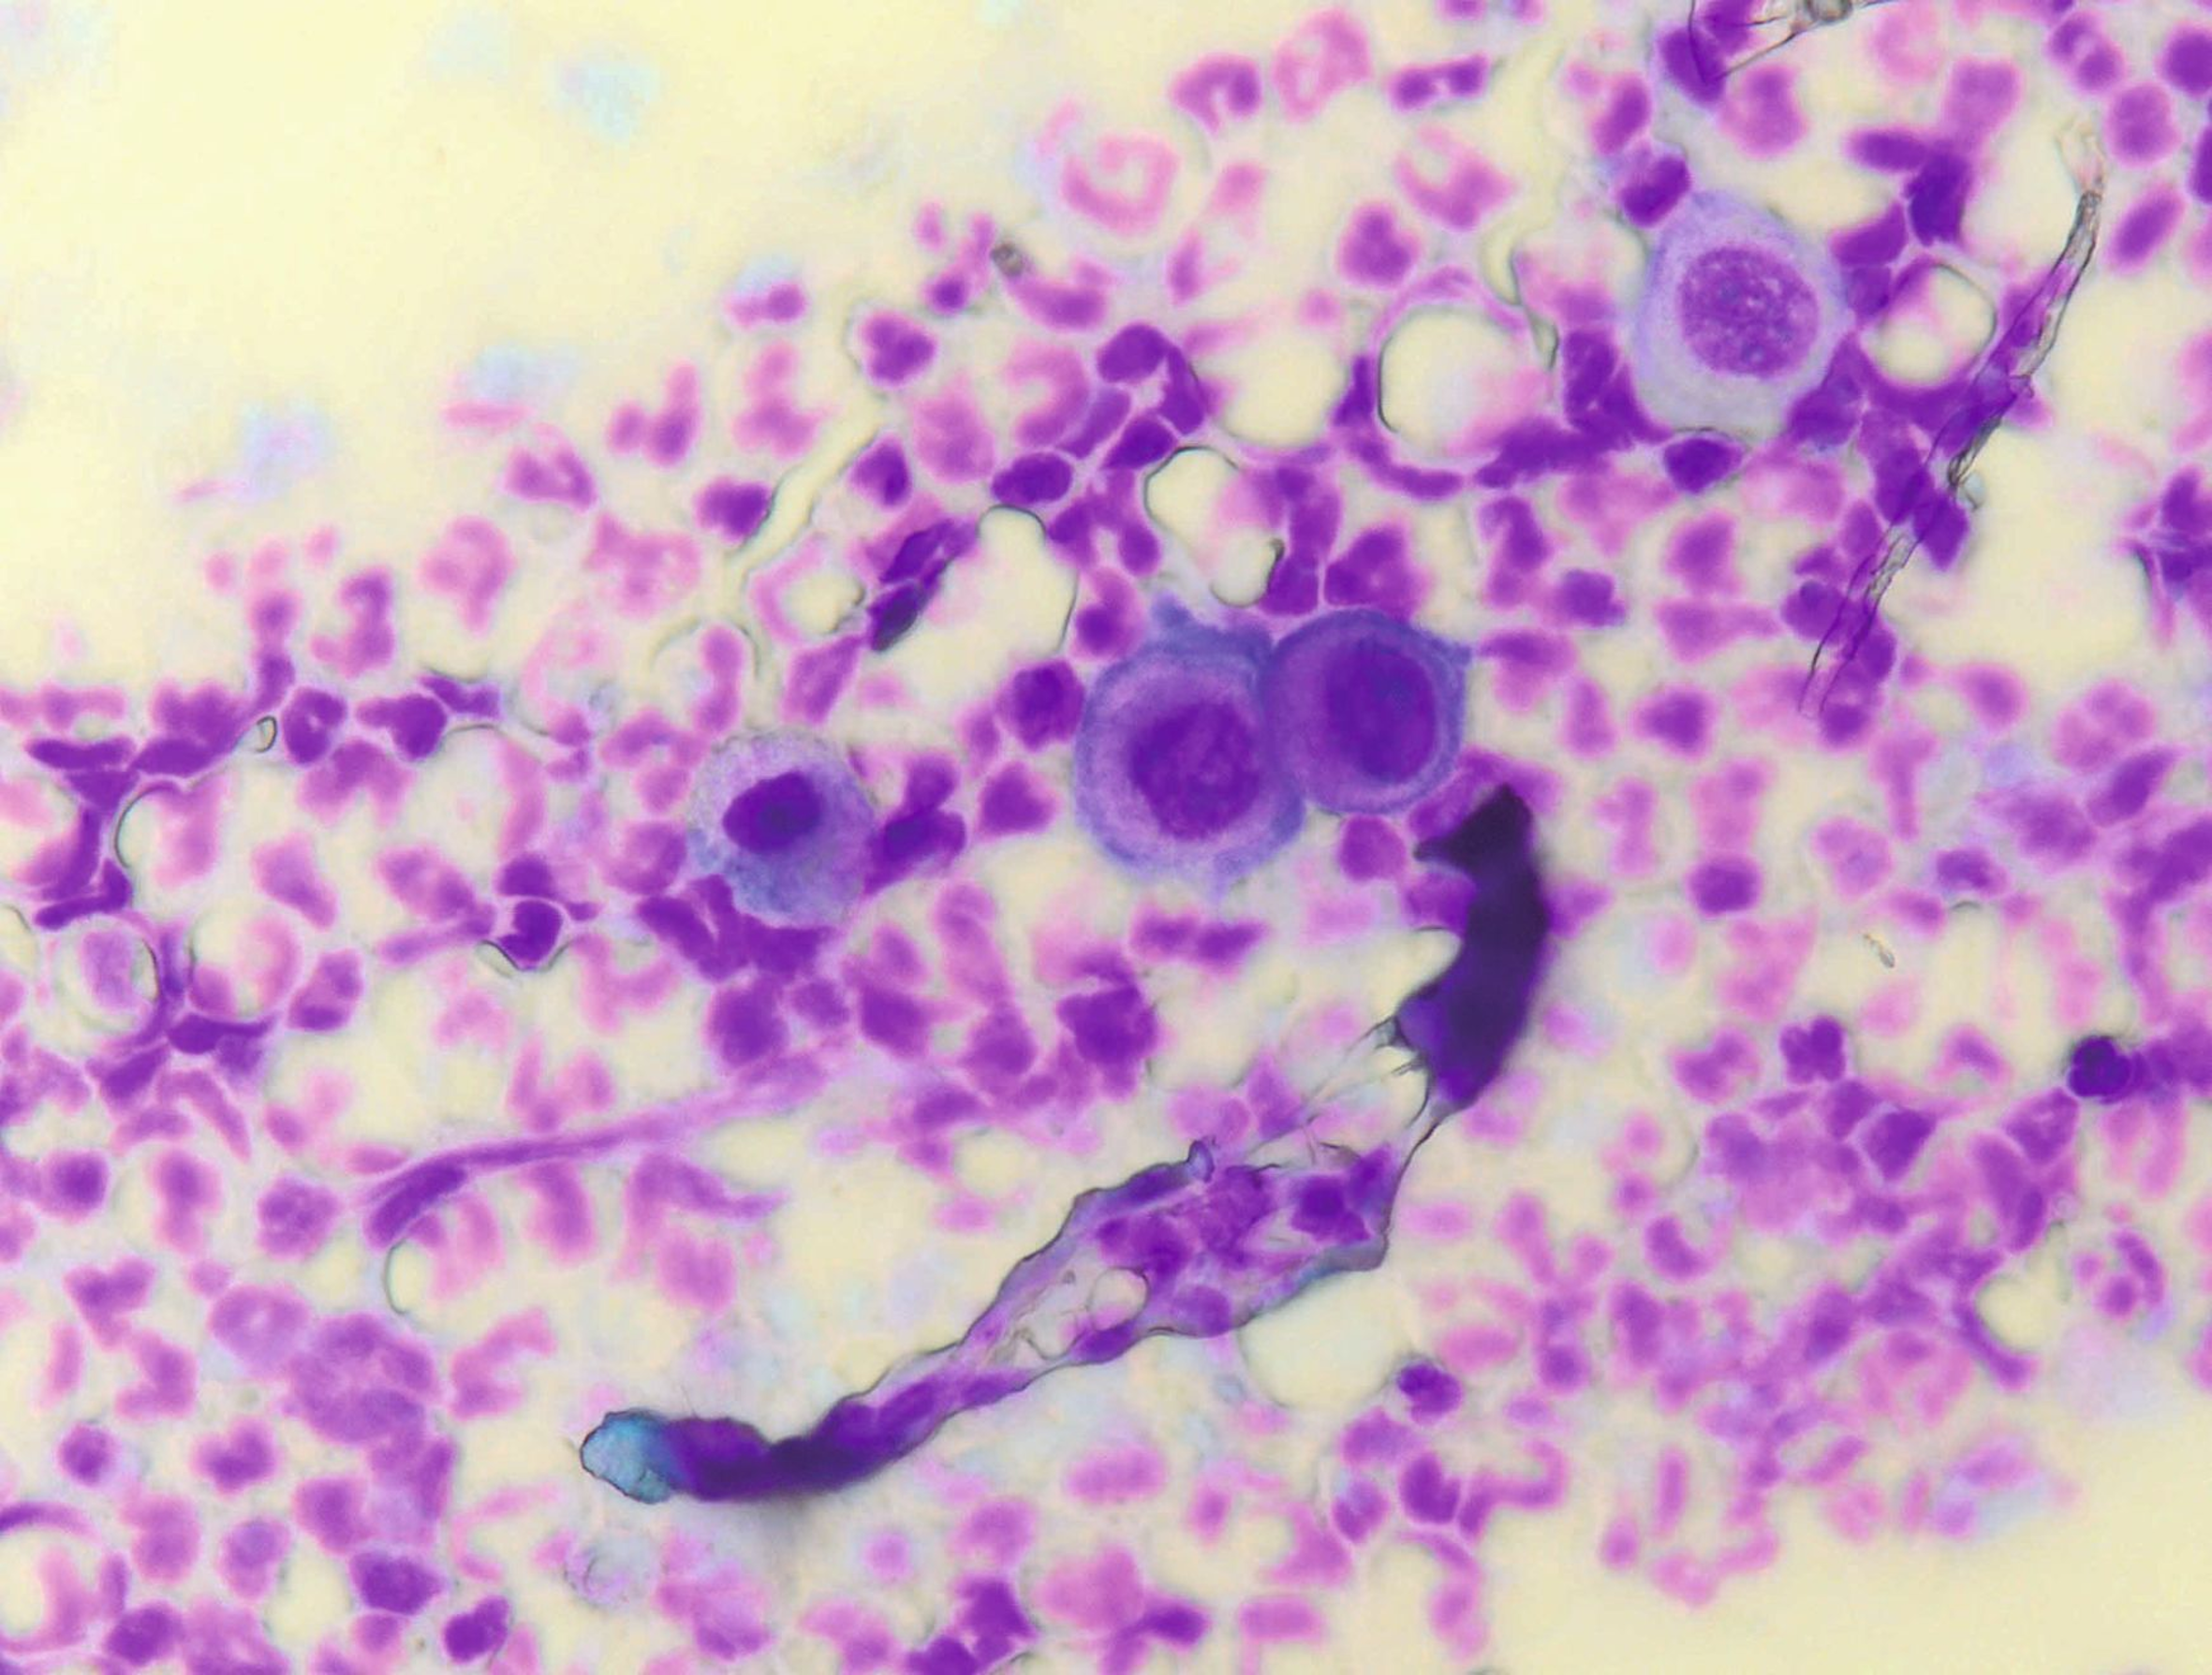 Cytology in feline pemphigus foliaceus; note the rounded (acantholytic) keratinocytes in small clusters (like “fried eggs”) surrounded by neutrophils.